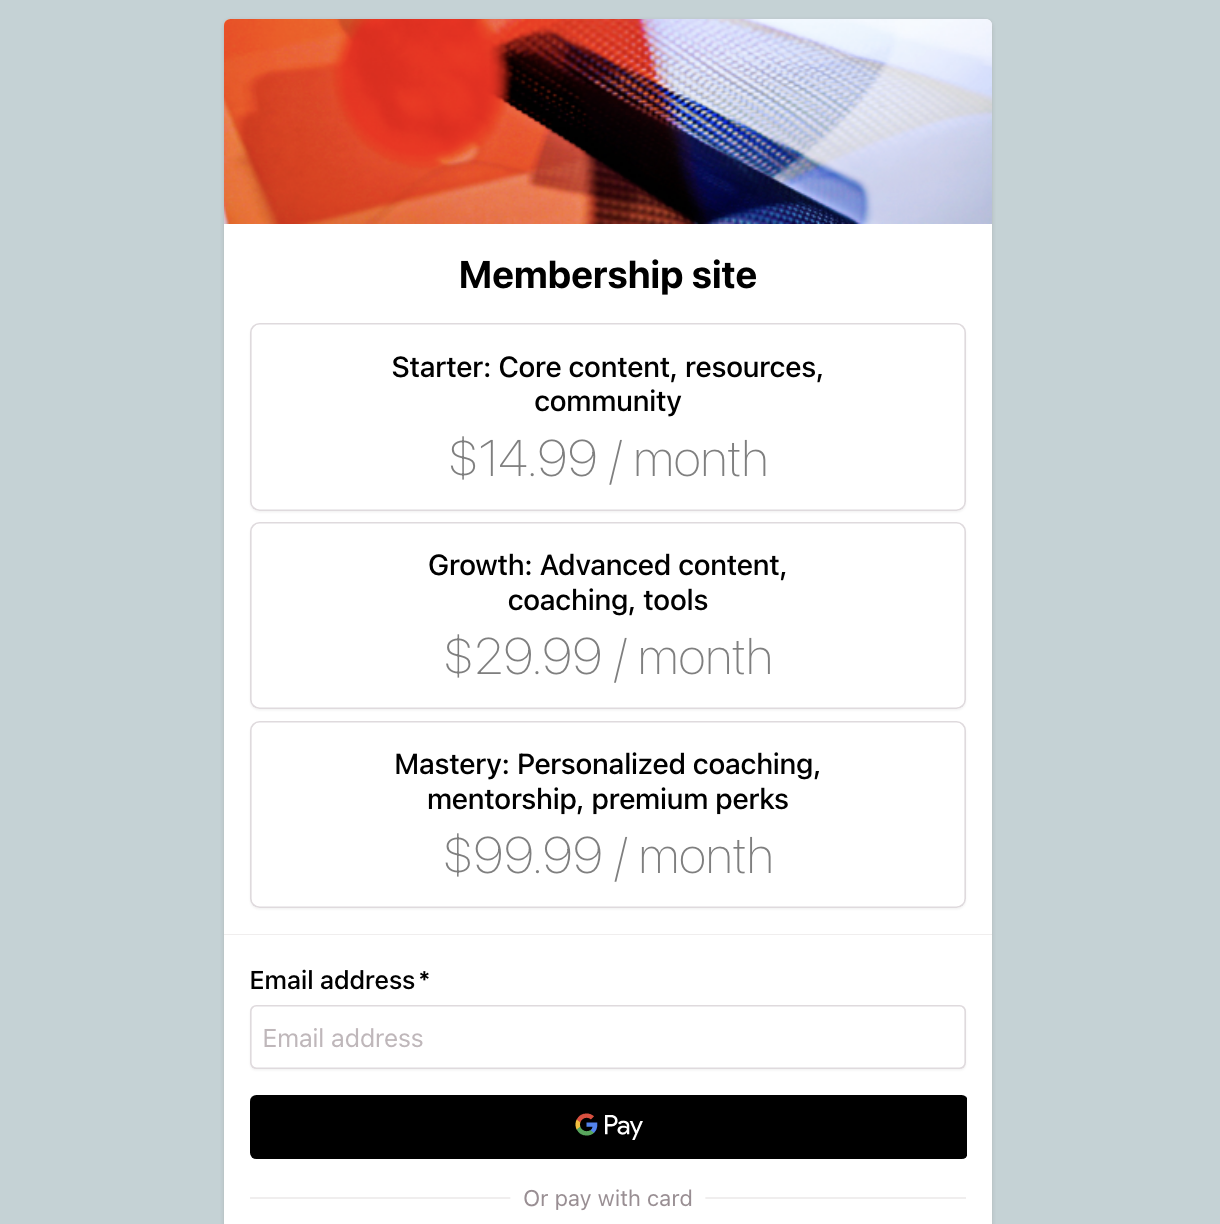 Membership site using tiered pricing model to sell access levels to follower